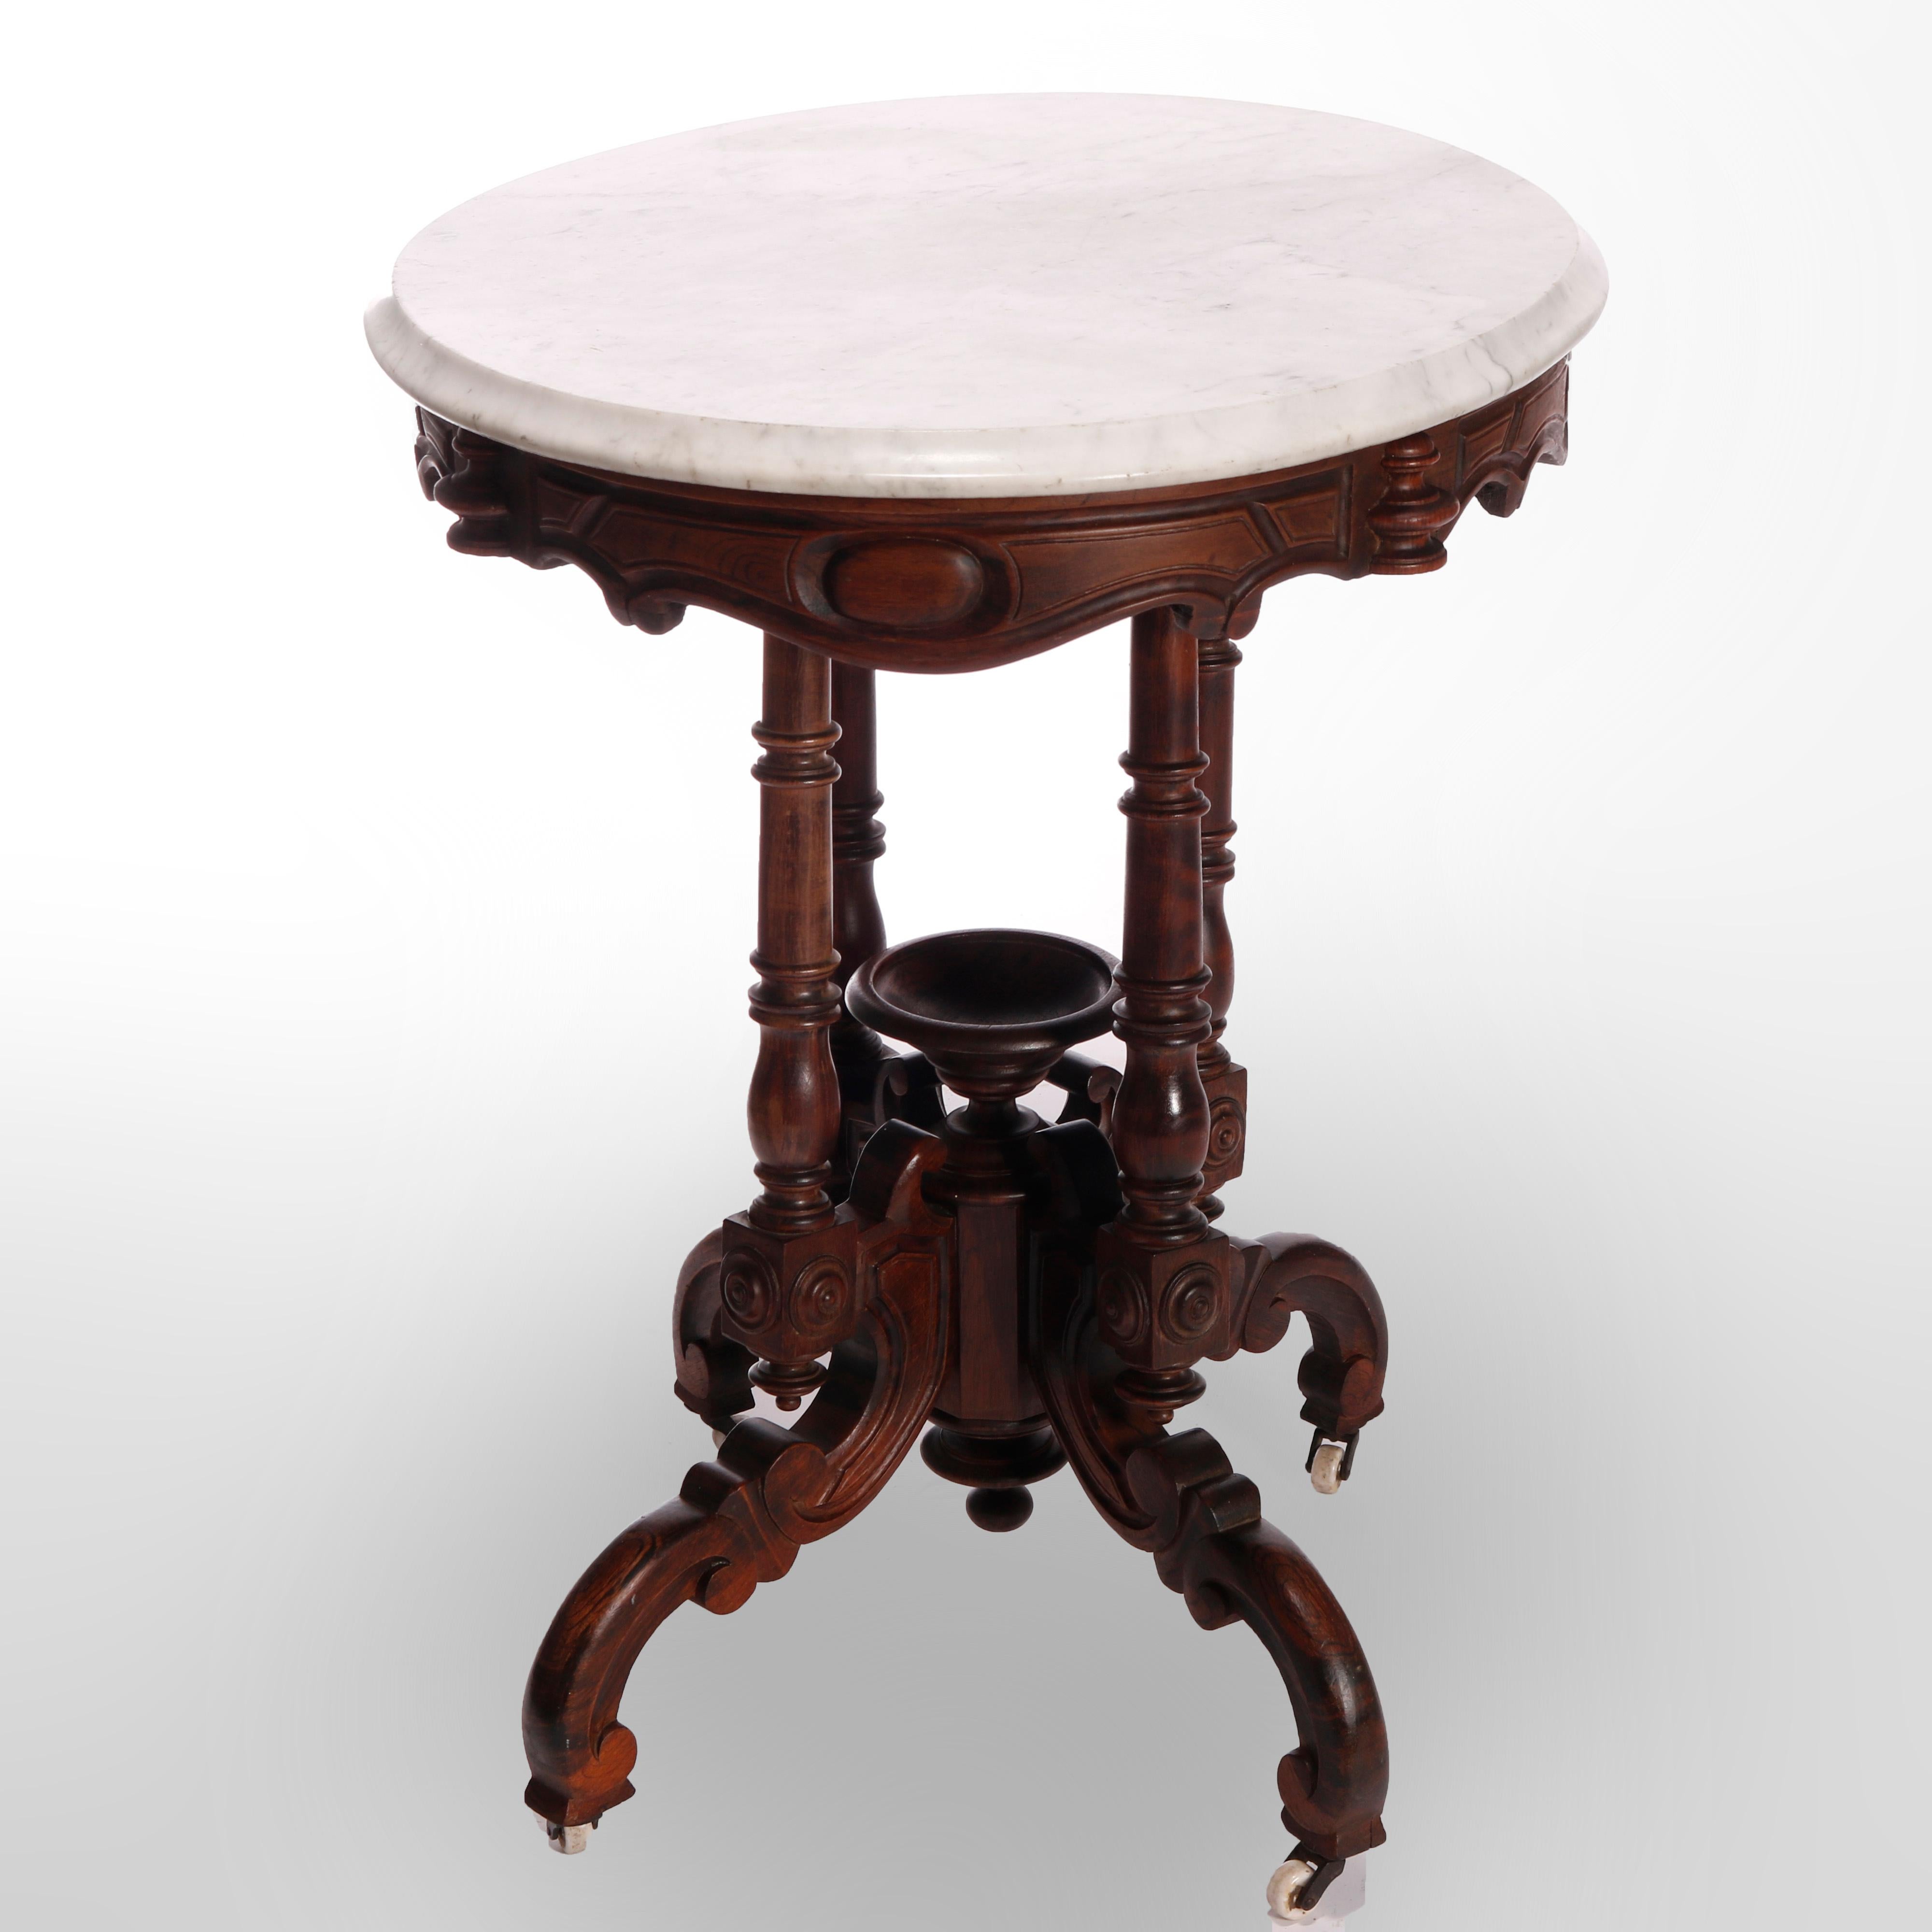 An antique Victorian parlor table offers beveled marble top over rosewood base having carved scroll form skirt raised on four turned columns having central urn form finial and scroll form legs, c1880

Measures - 29'' H x 30'' W x 22'' D.

Catalogue